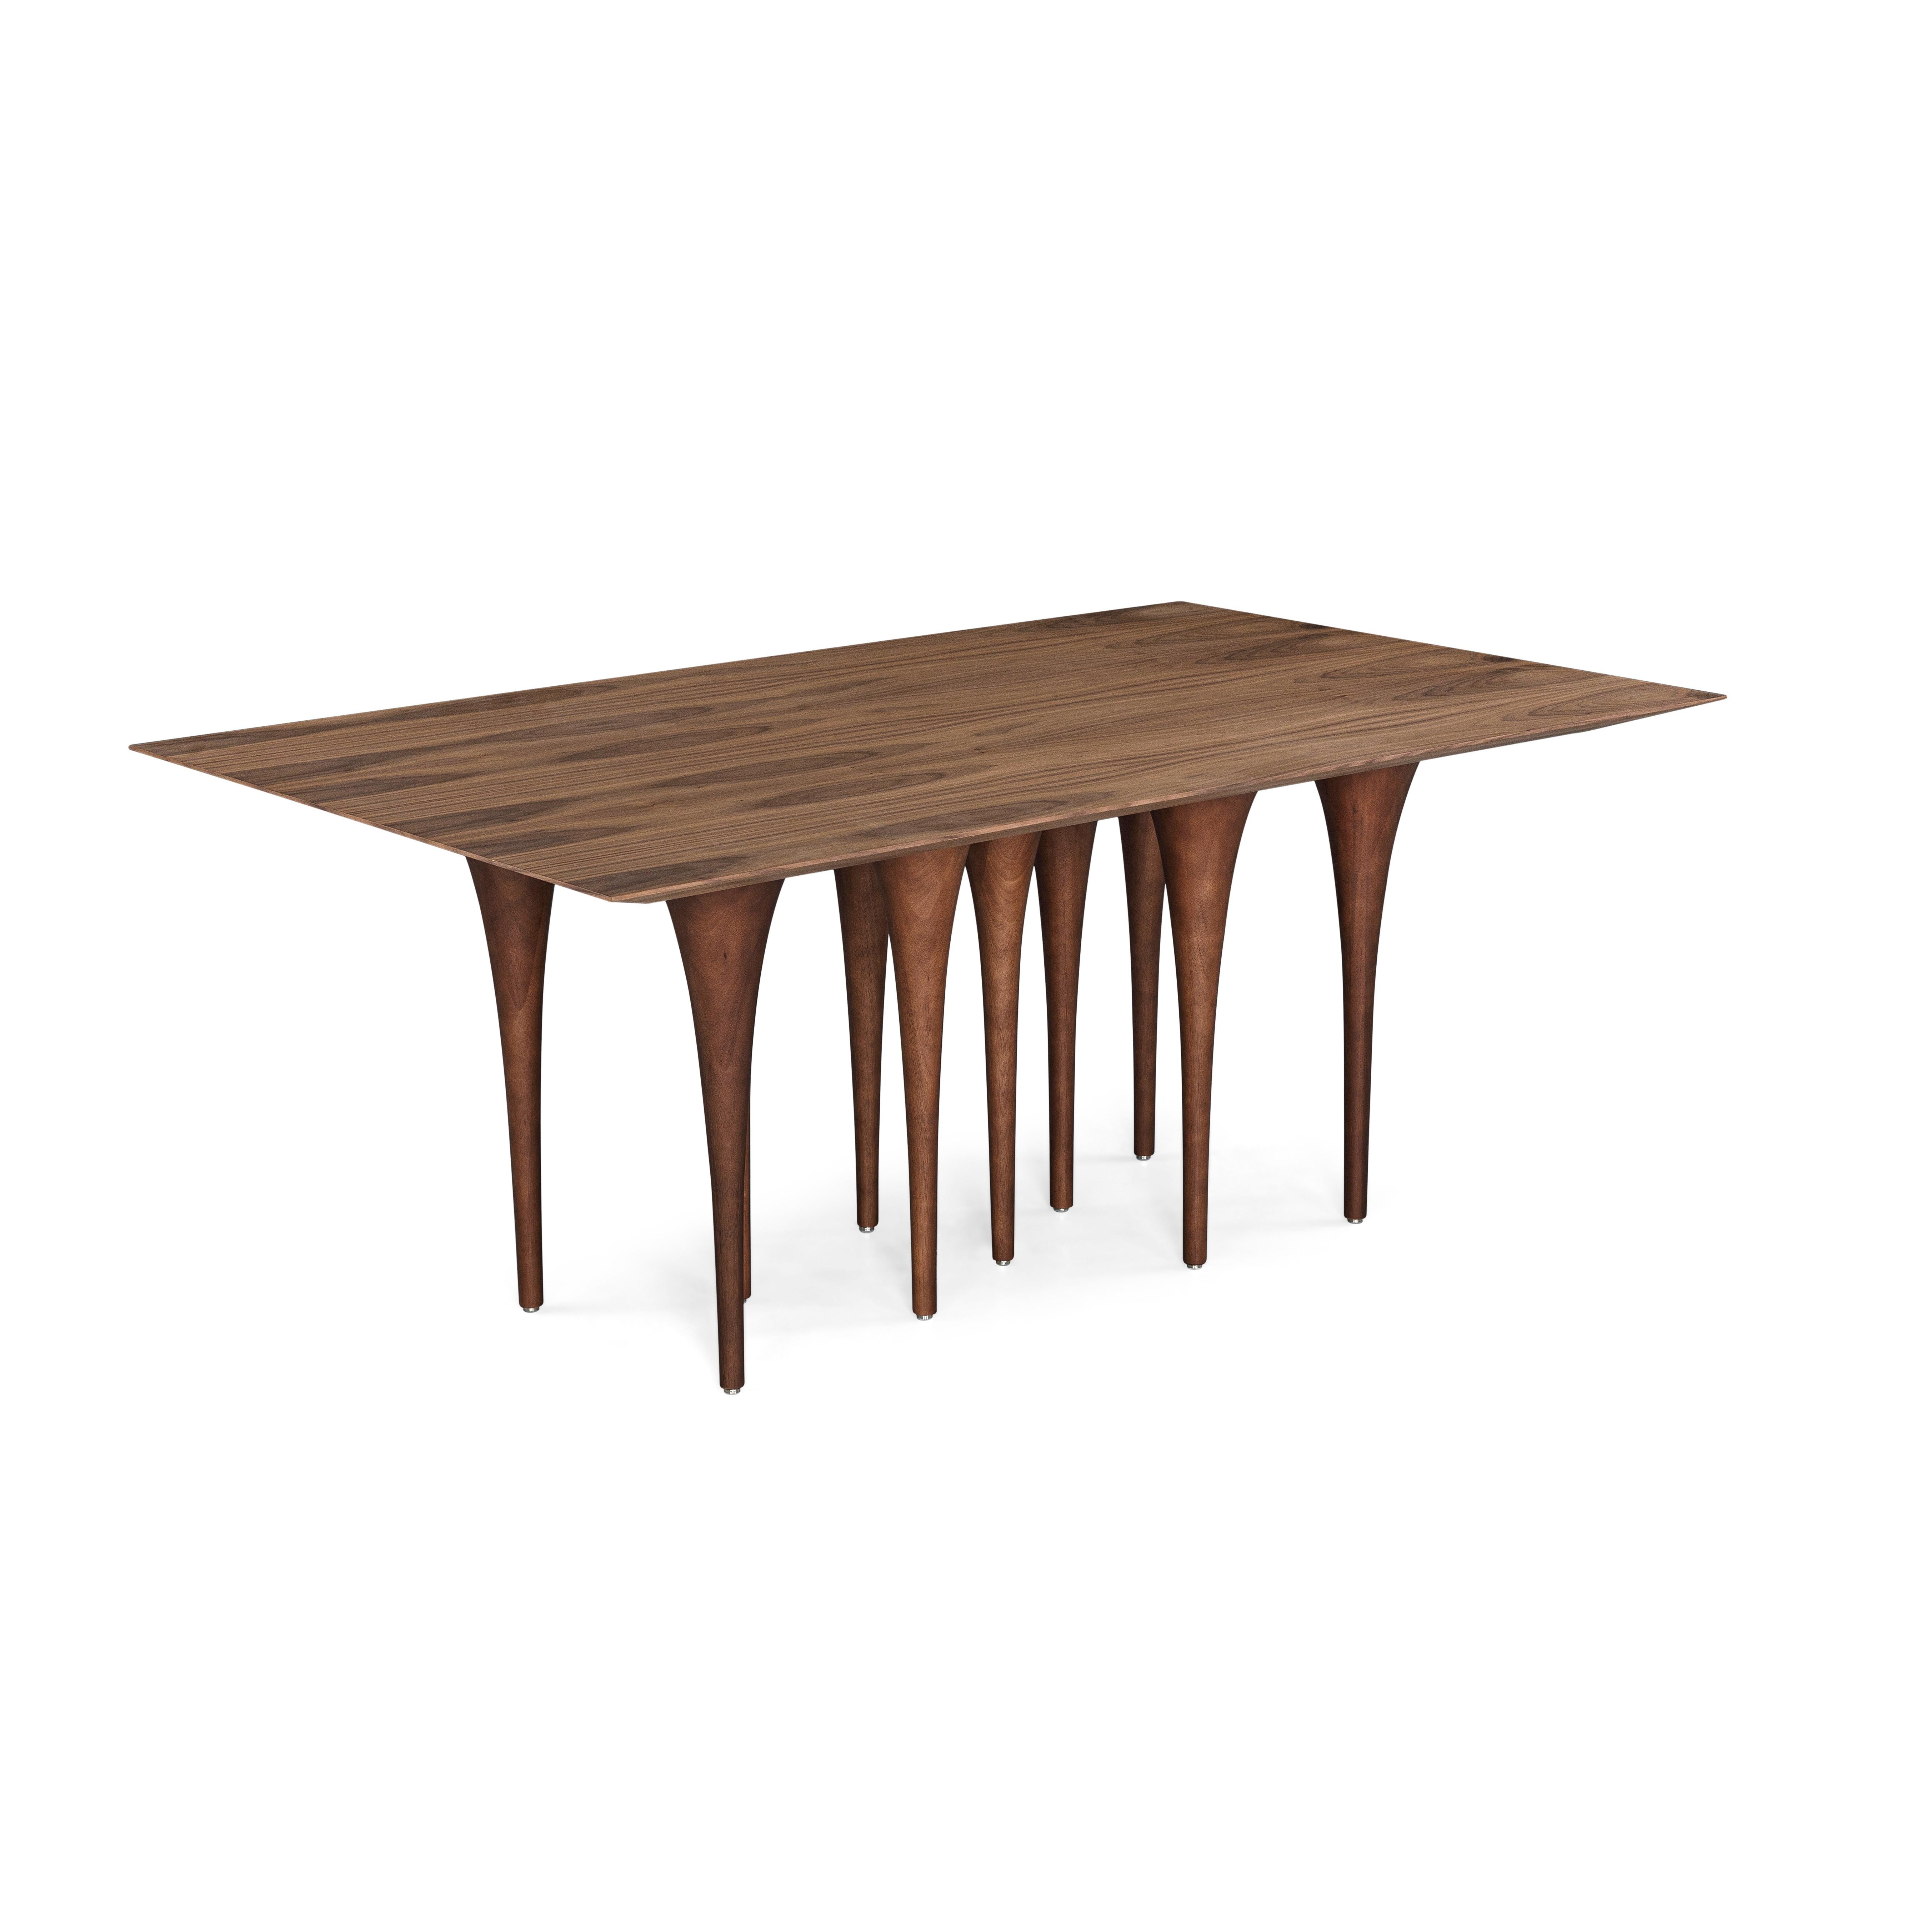 Brazilian Pin Dining Table with a Walnut Wood Veneered Table Top and 10 Legs 71'' For Sale